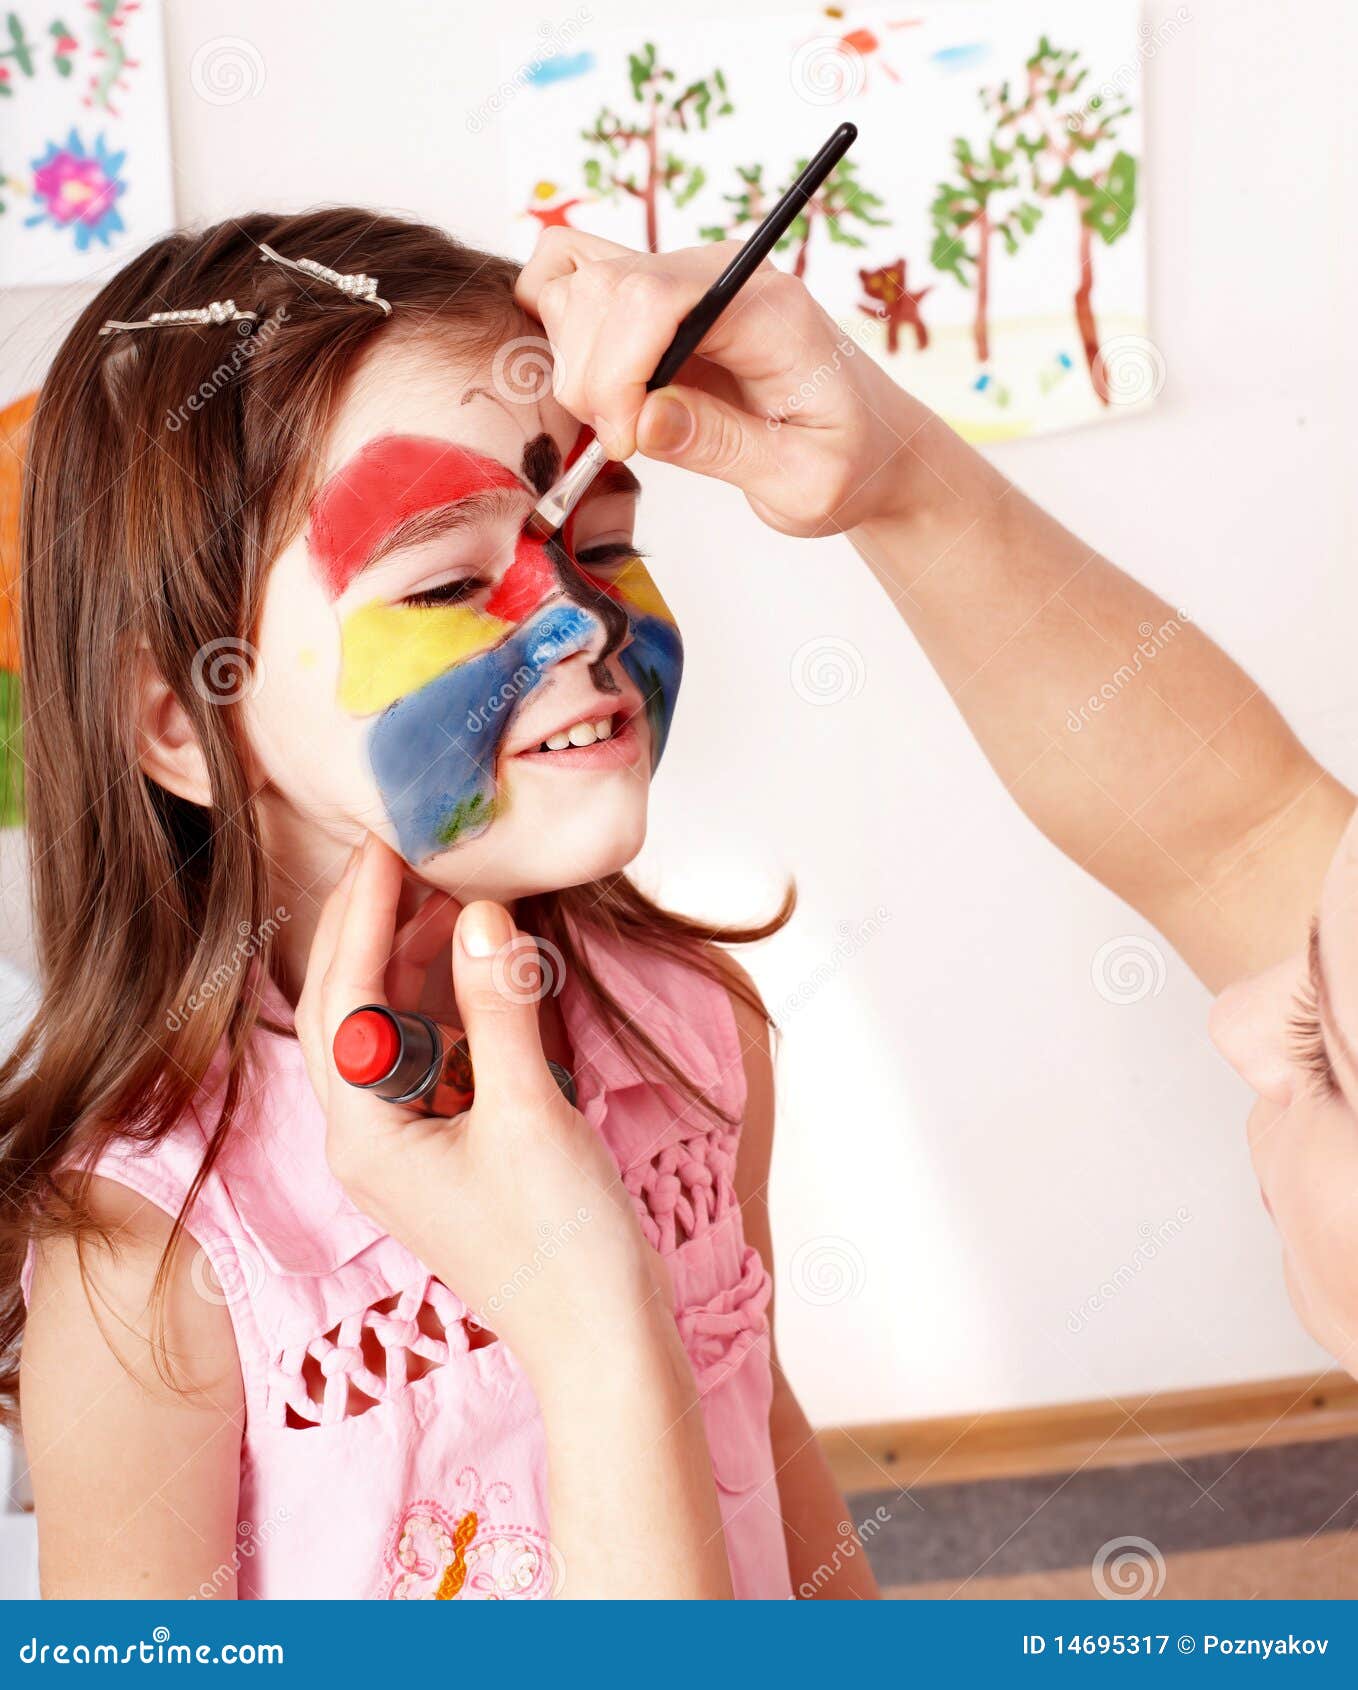 child preschooler with face painting.